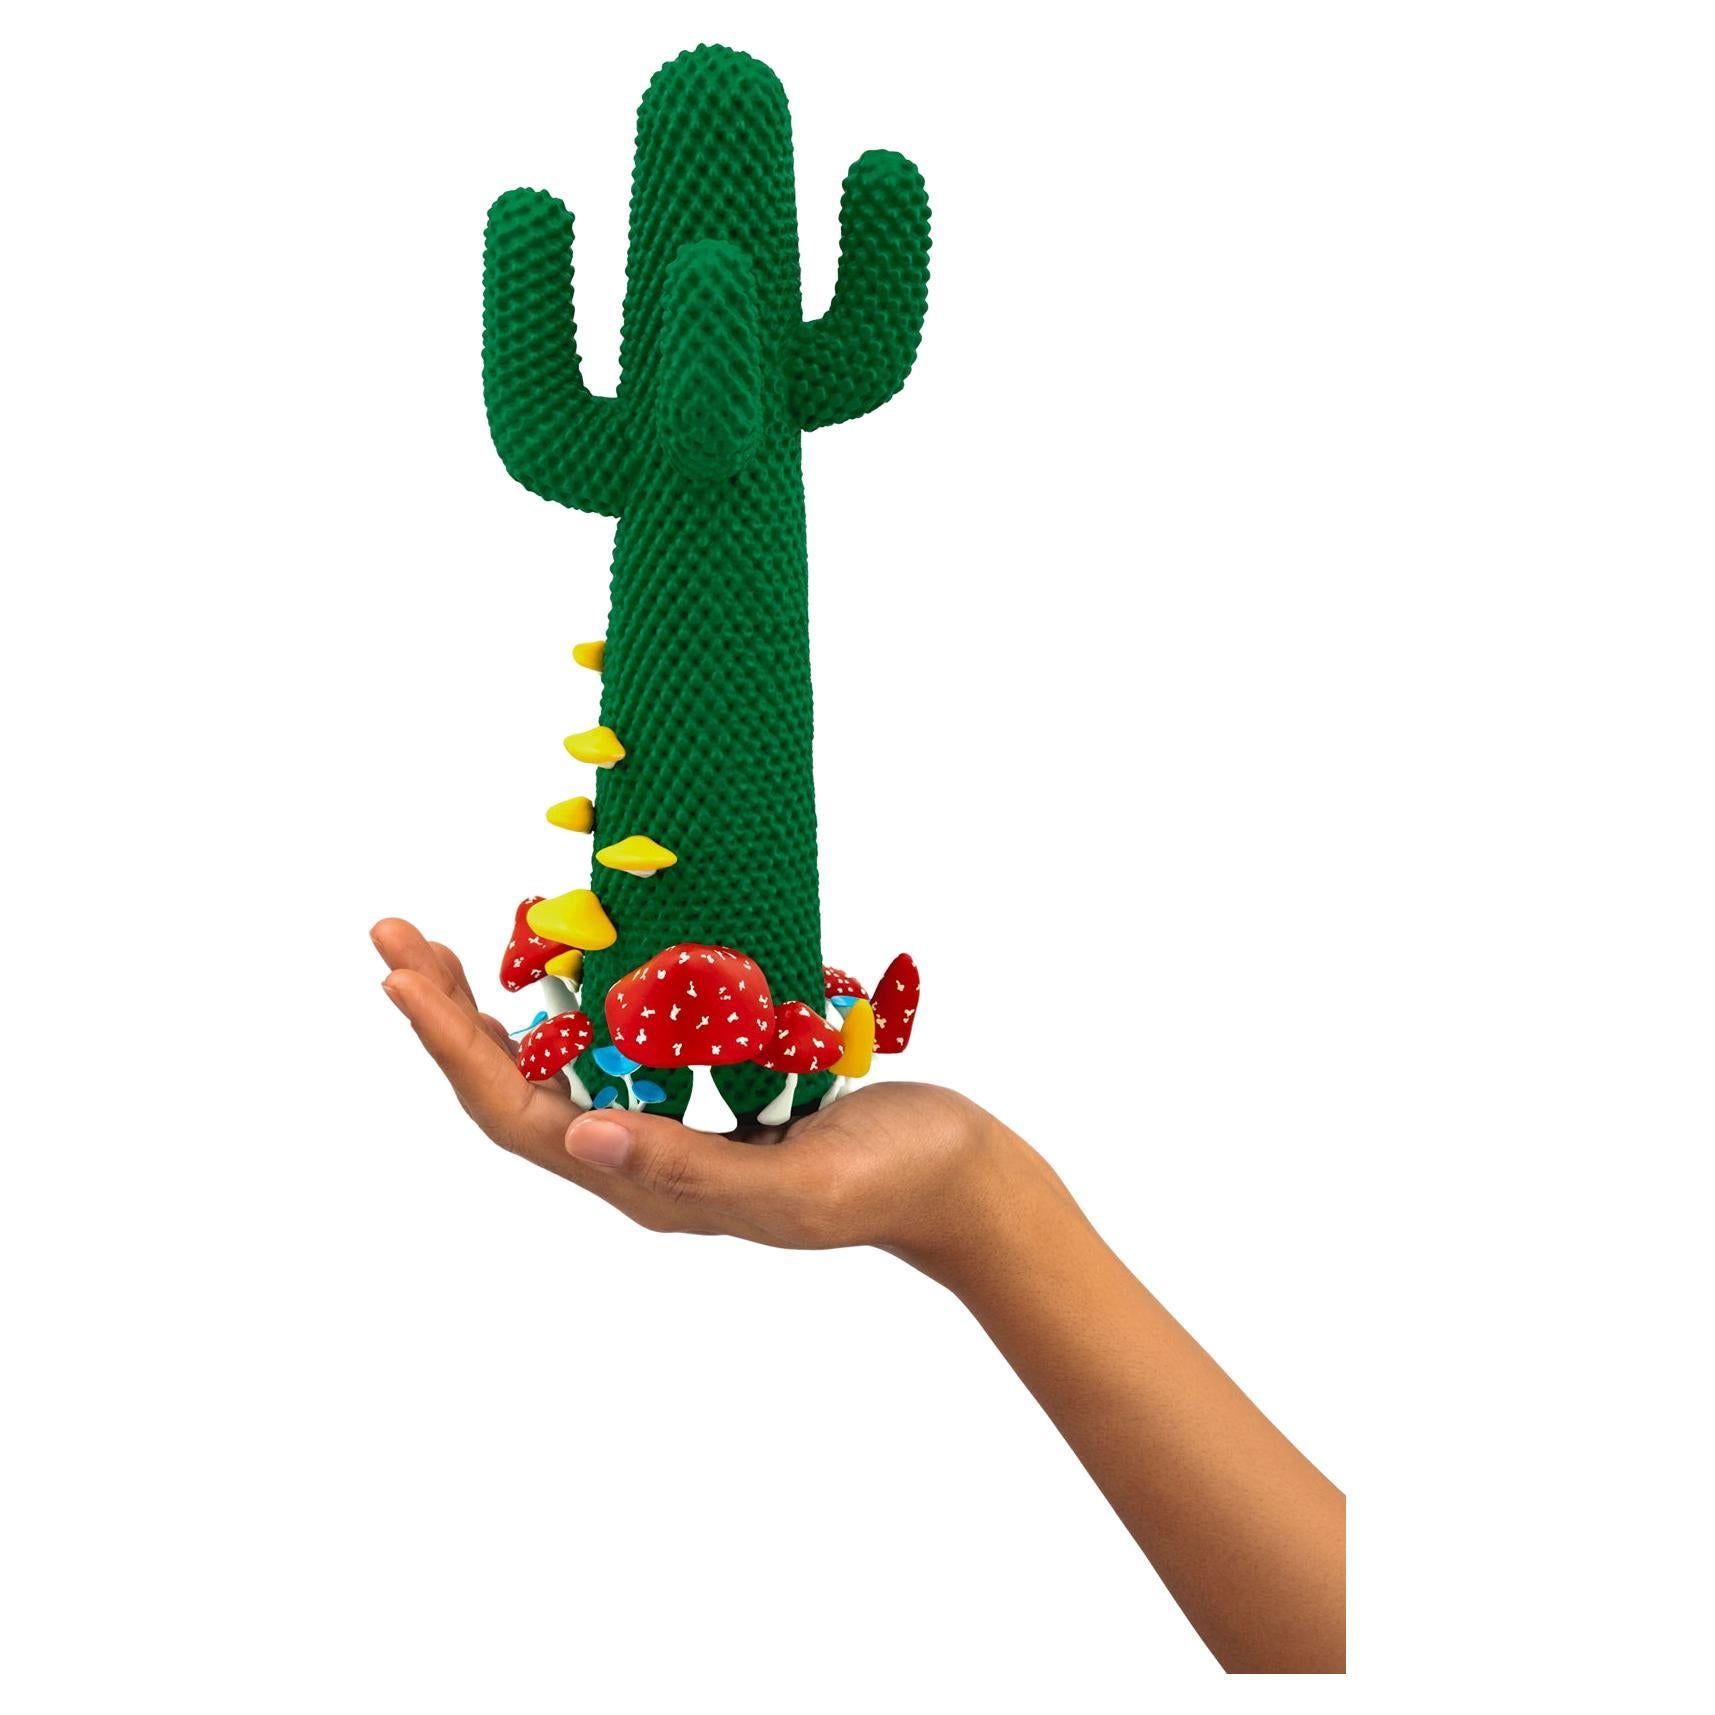 Limited Edition #76/99

Gufram presents the miniaturised version of the Shroom CACTUS® created in collaboration with A$AP Rocky and the artist’s new design studio HOMMEMADE Exactly as the real-size Shroom CACTUS®, the new Guframini piece features